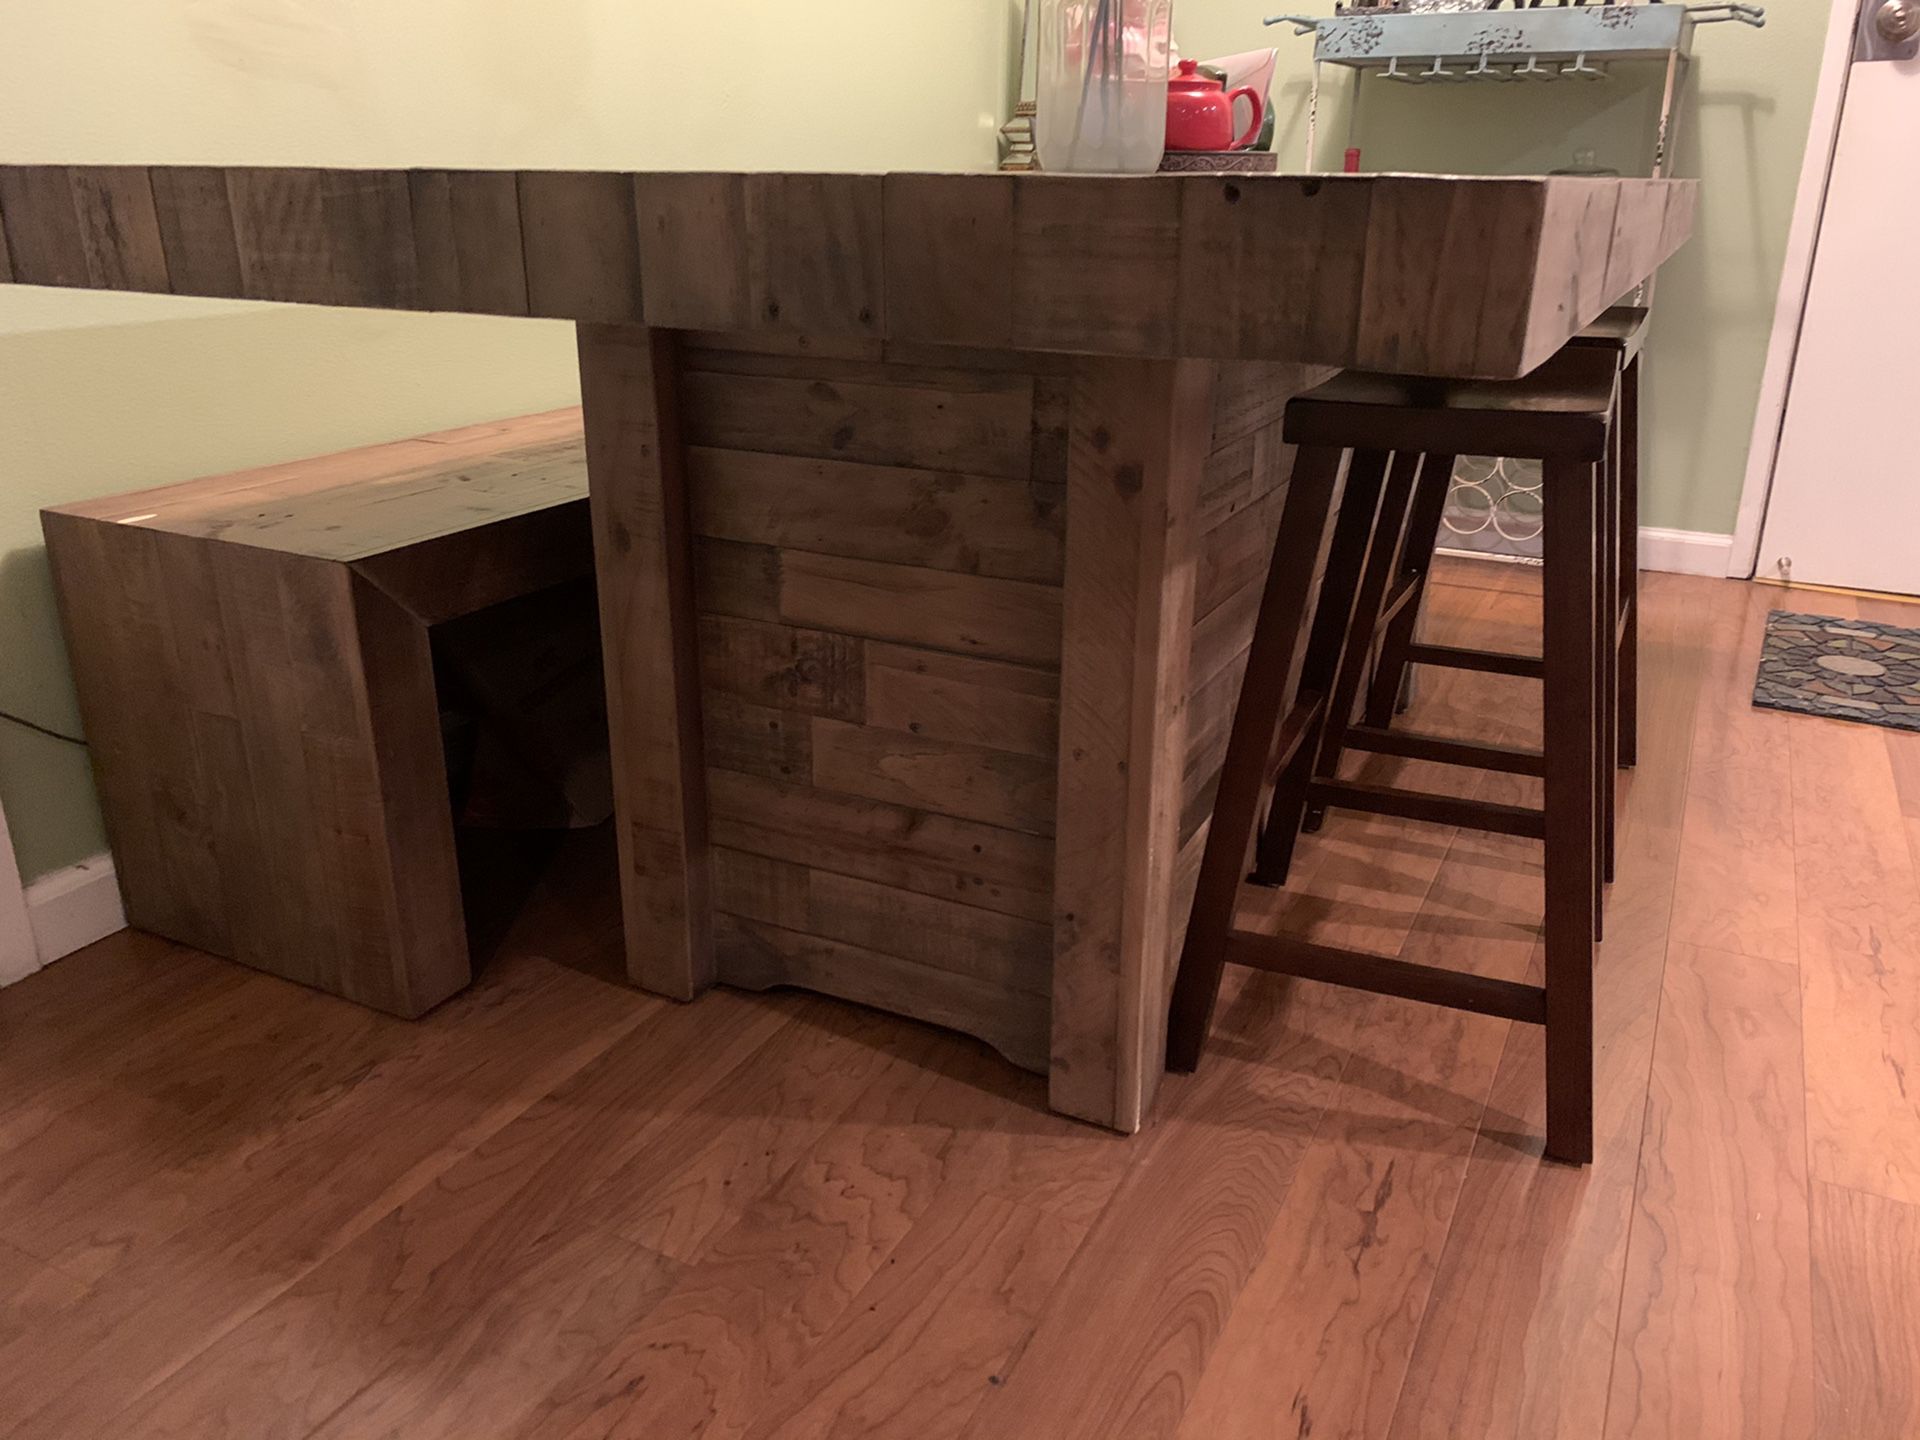 Wooden dining table, bench, and stools